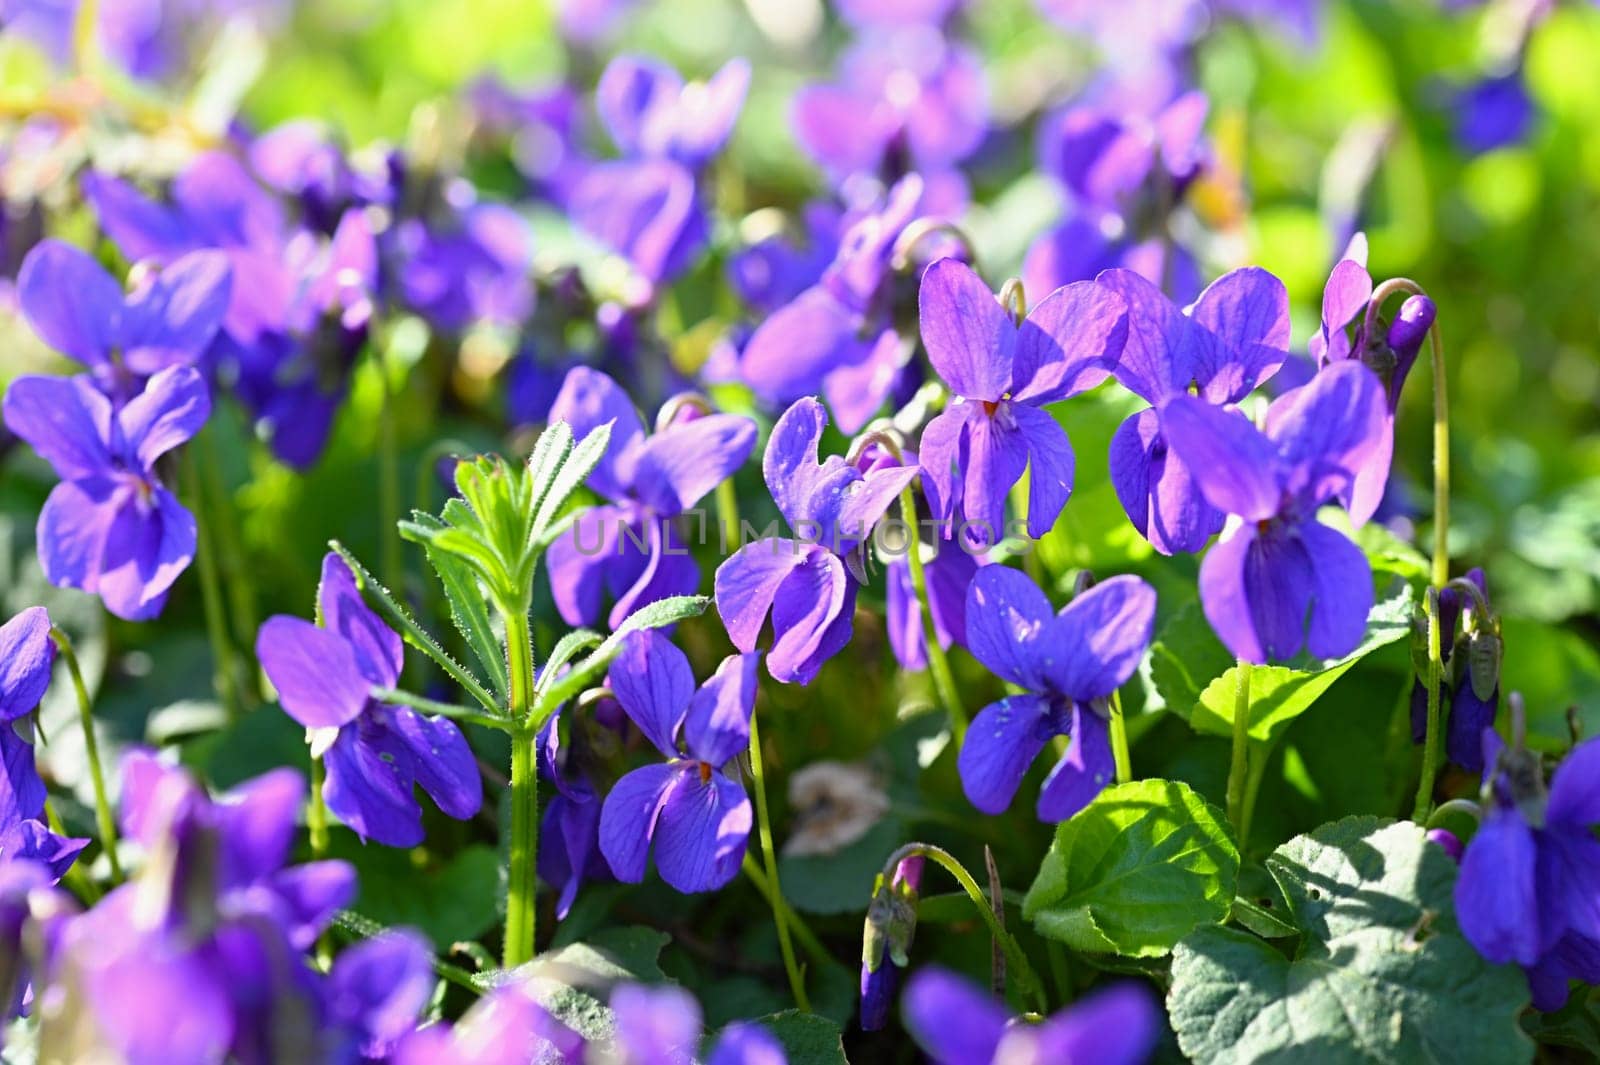 Beautiful spring small purple flower-plant Violka fragrant - Violka. Spring time in nature. (Viola odorata) by Montypeter